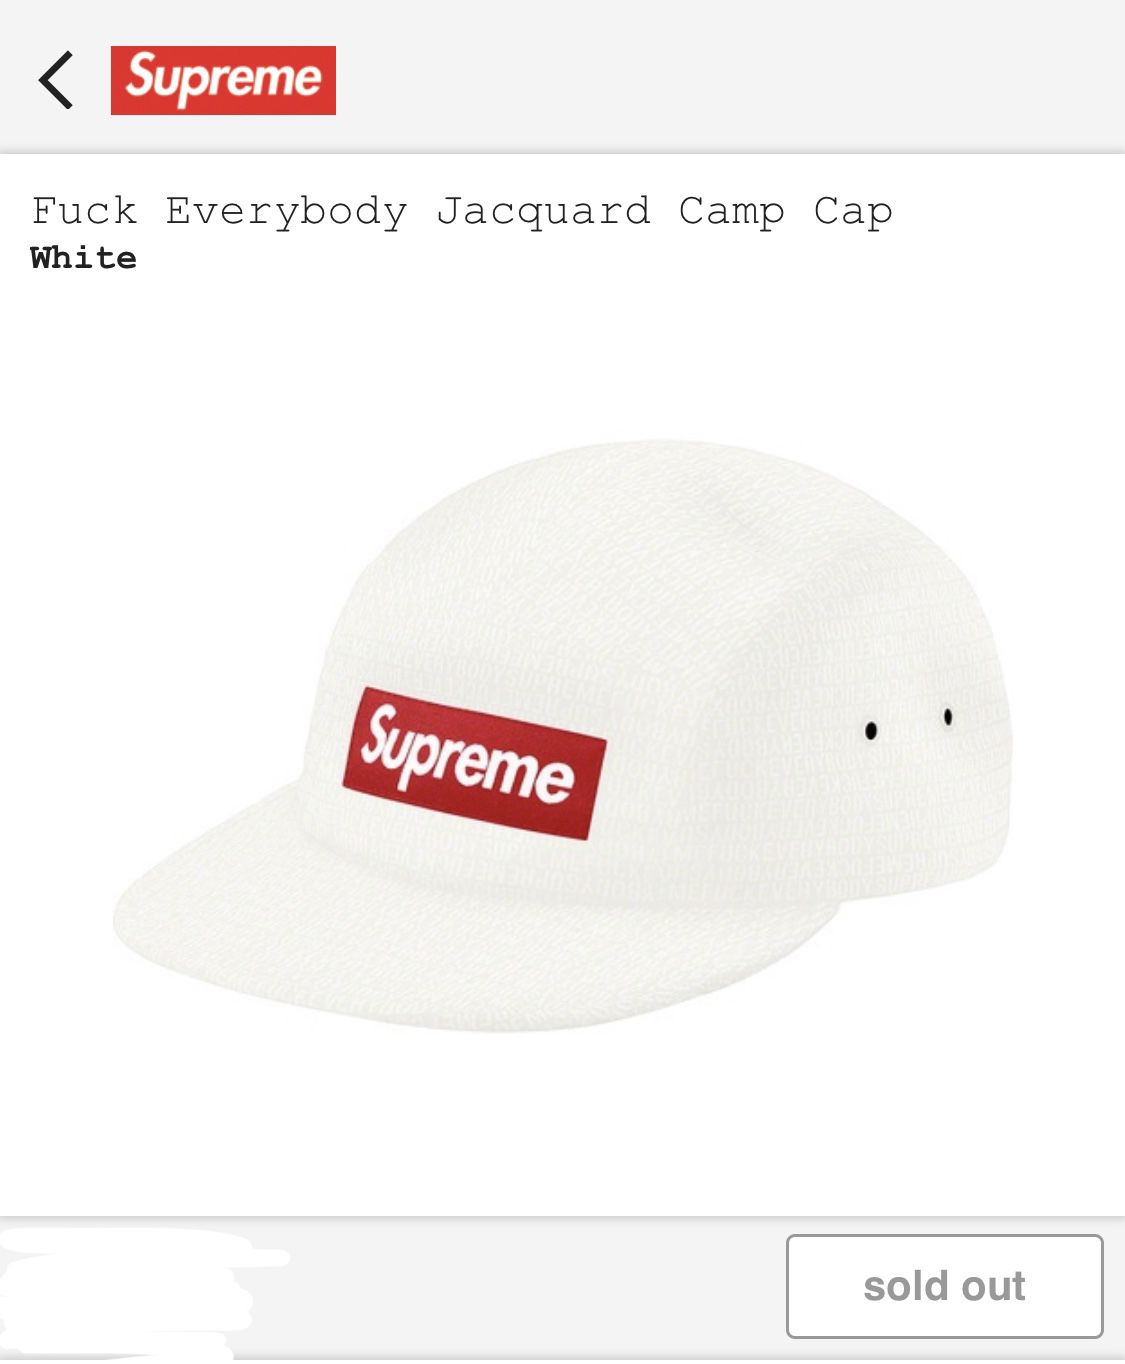 Supreme Fuck Everybody jacquard camp cap for Sale in Brooklyn, NY